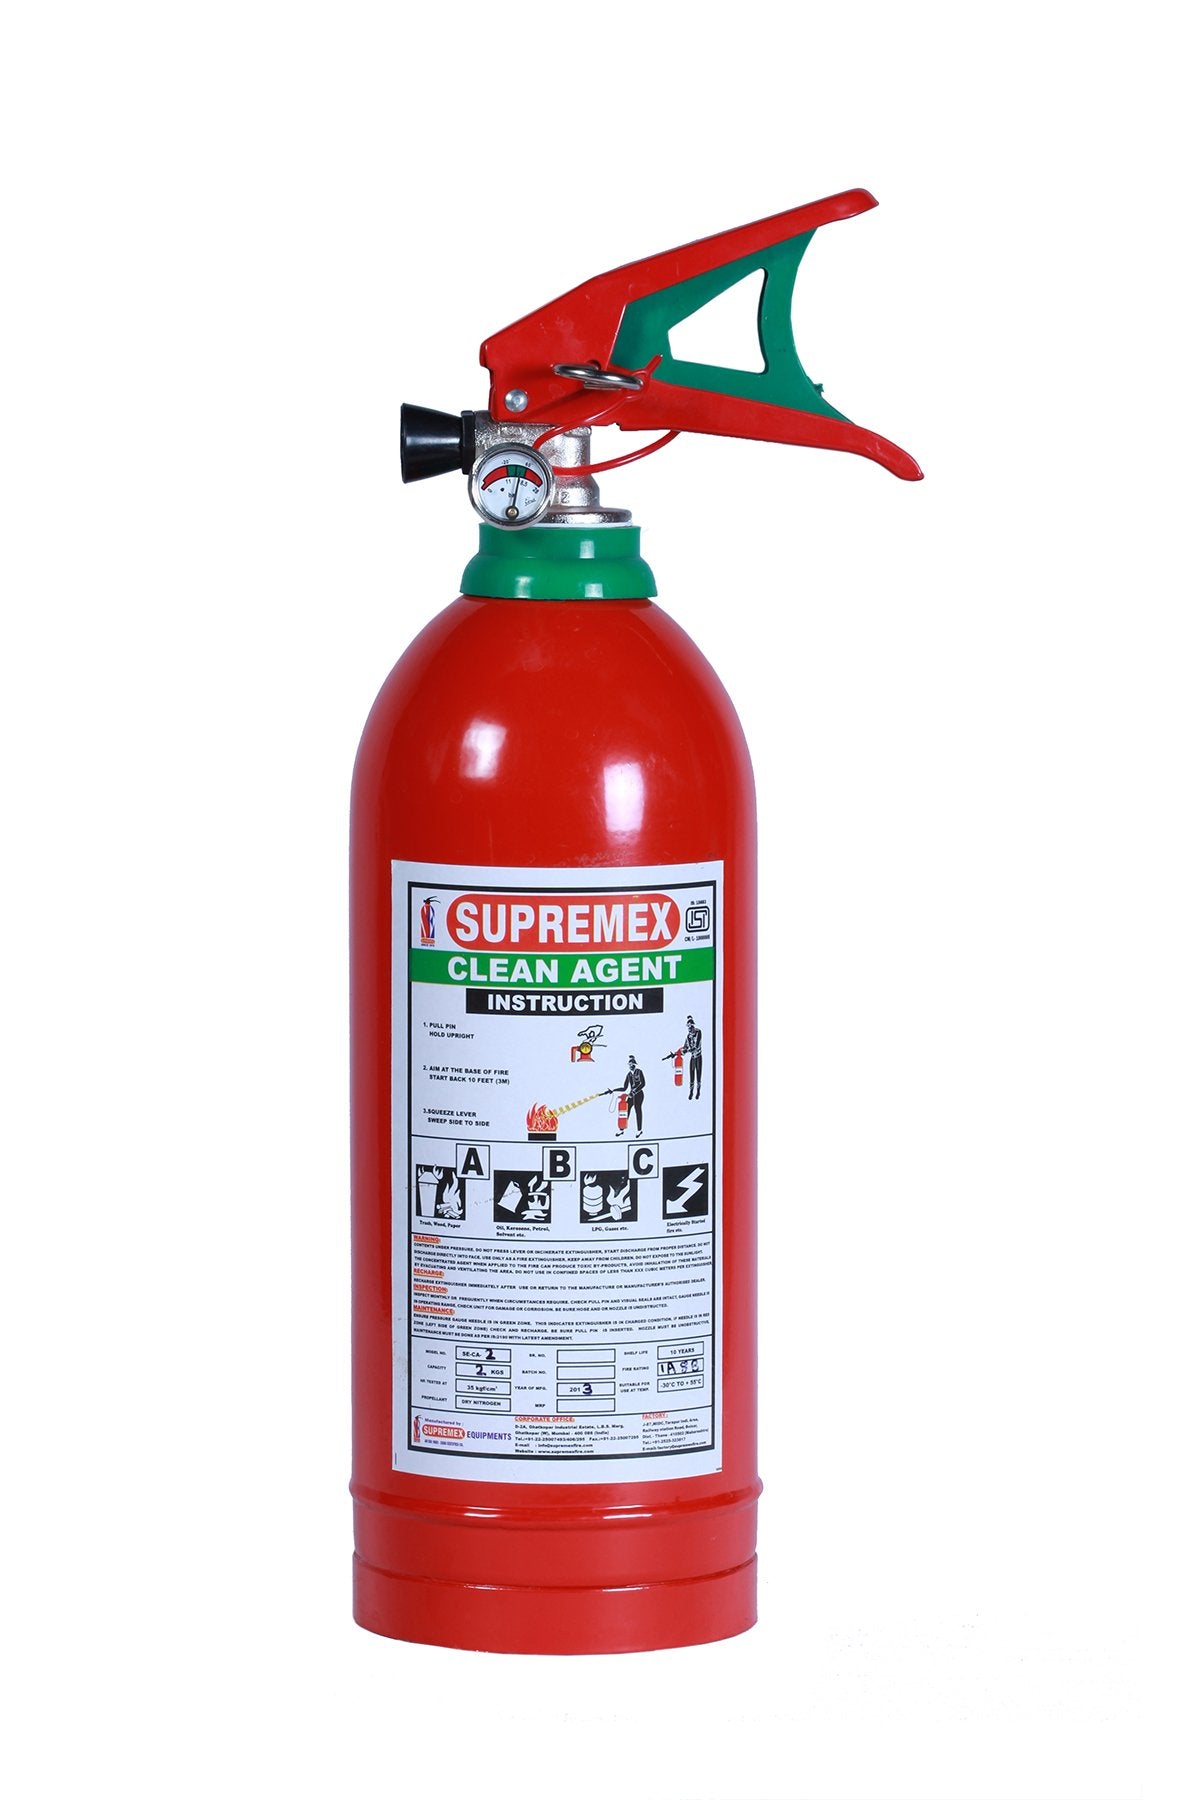 Clean agent Fire extinguisher